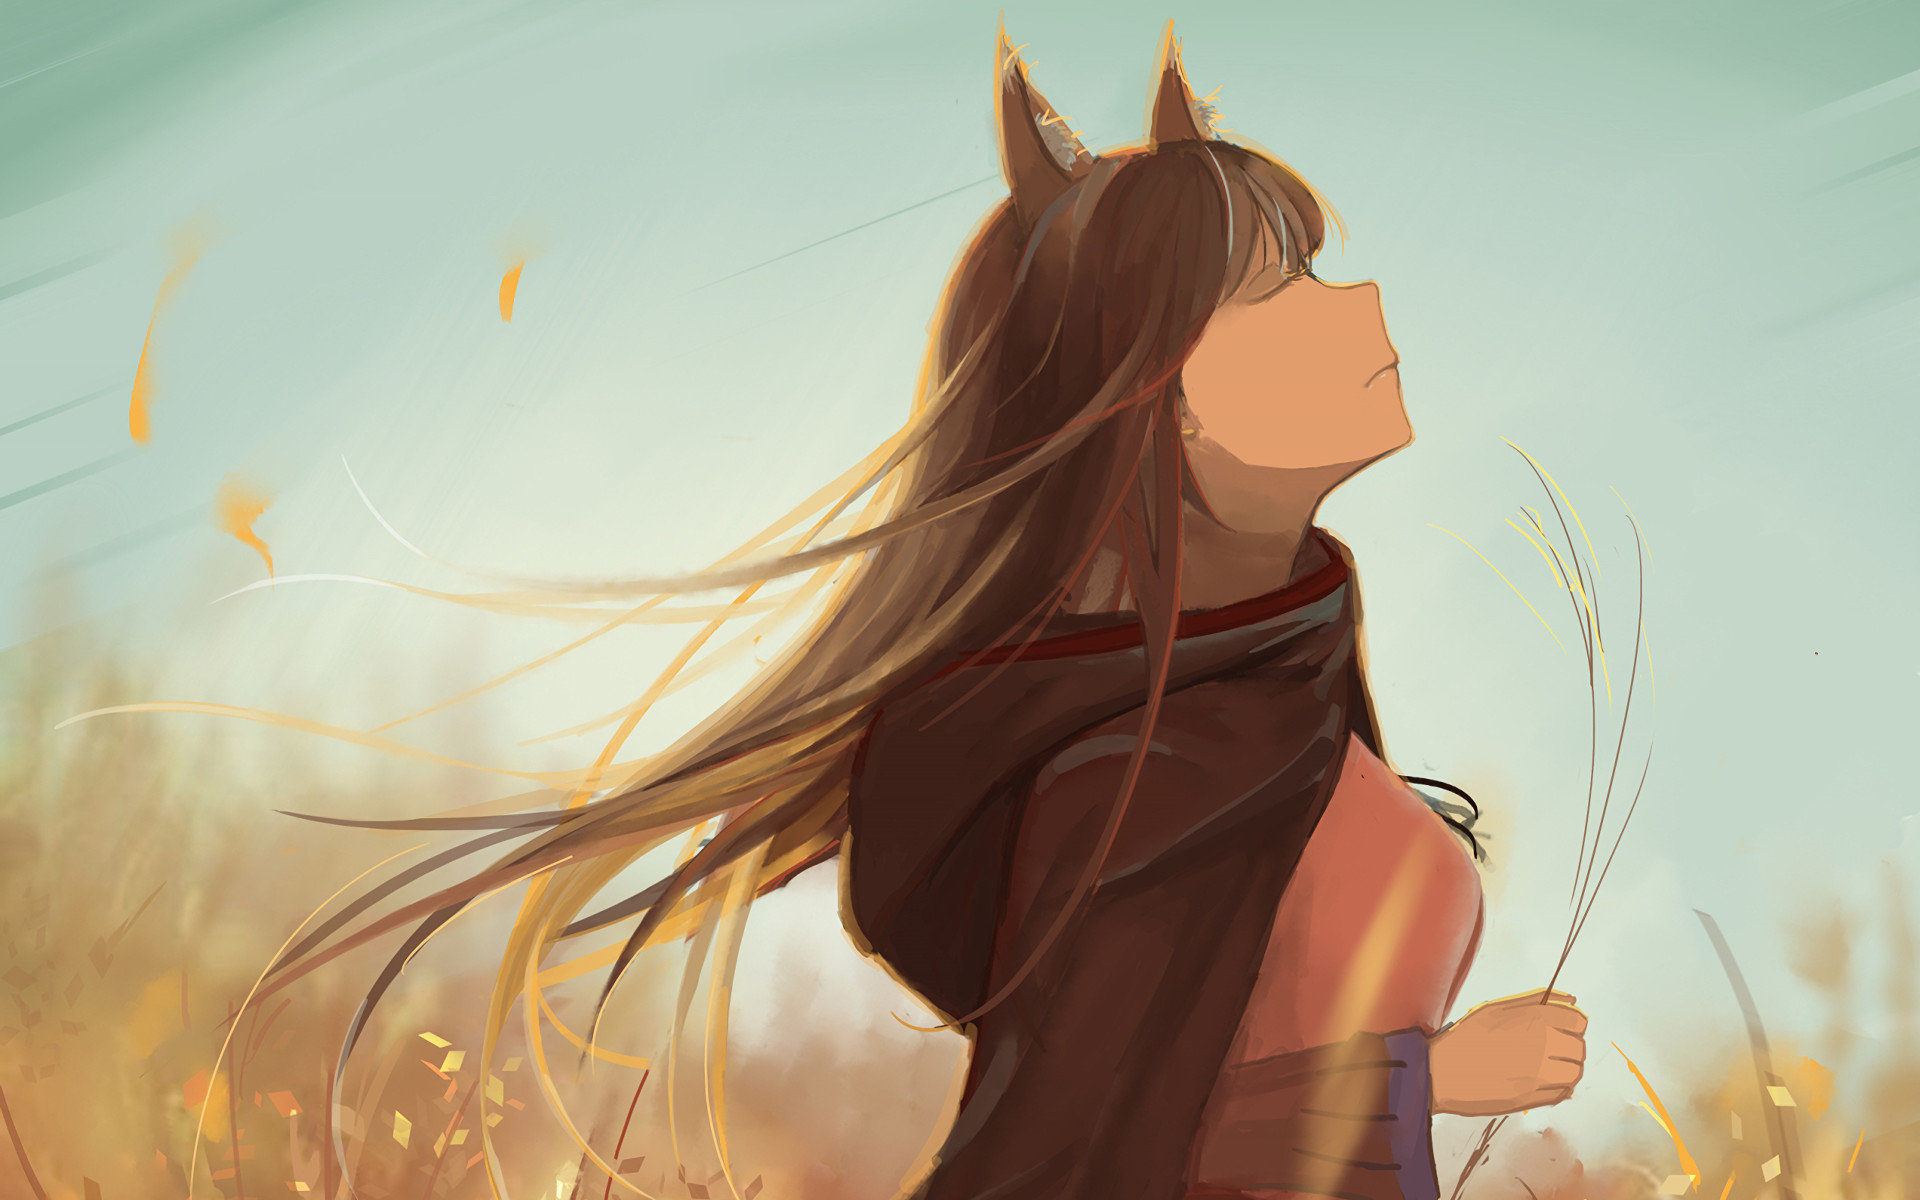 Best Holo Wallpaper Id - Spice And Wolf Holo Background - HD Wallpaper 